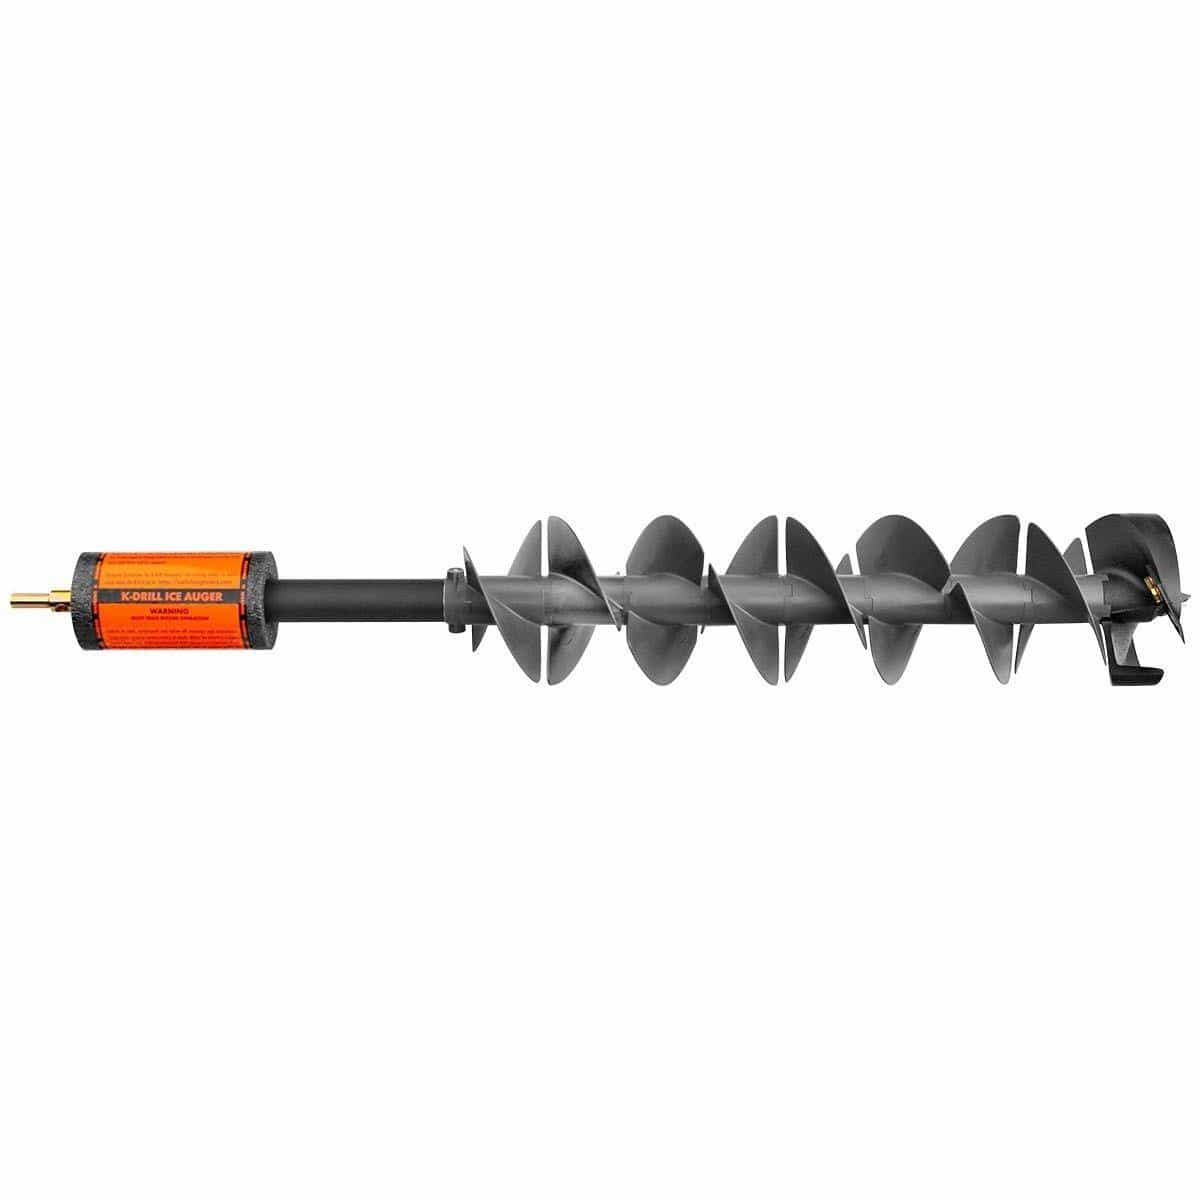 K Drill 6Ice Auger Fishing World